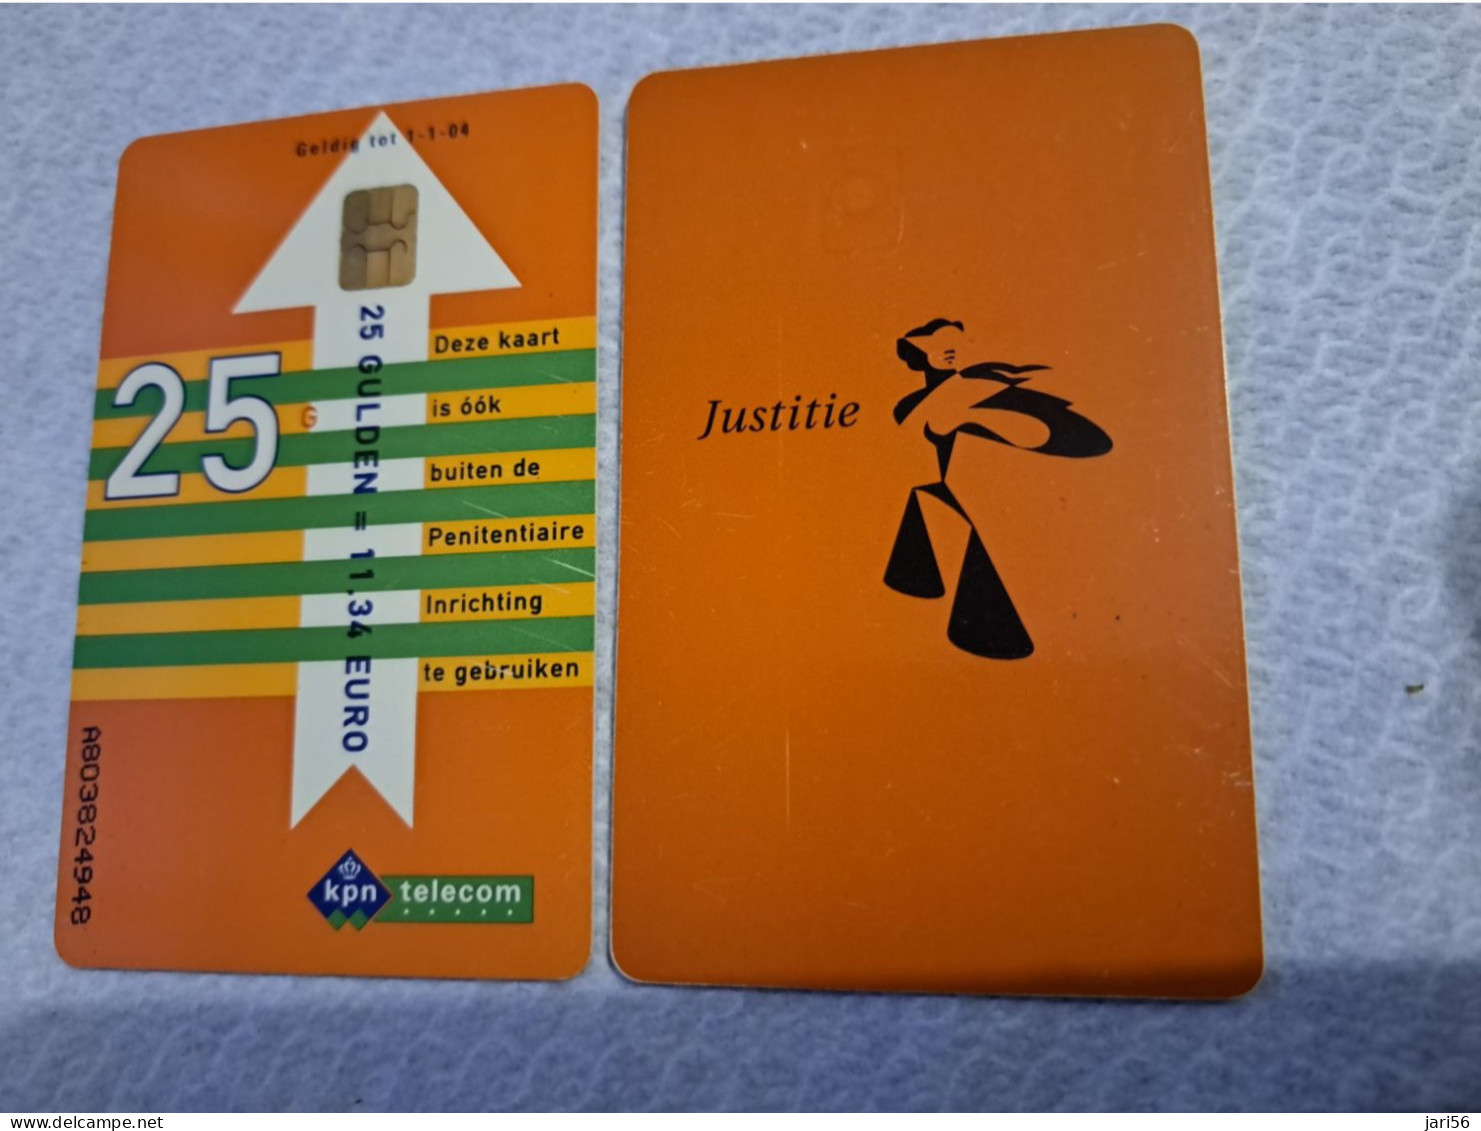 NETHERLANDS   HFL 25,-  / USED  / DATE  1-1-04  JUSTITIE/PRISON CARD  CHIP CARD/ USED   ** 16158** - Schede GSM, Prepagate E Ricariche